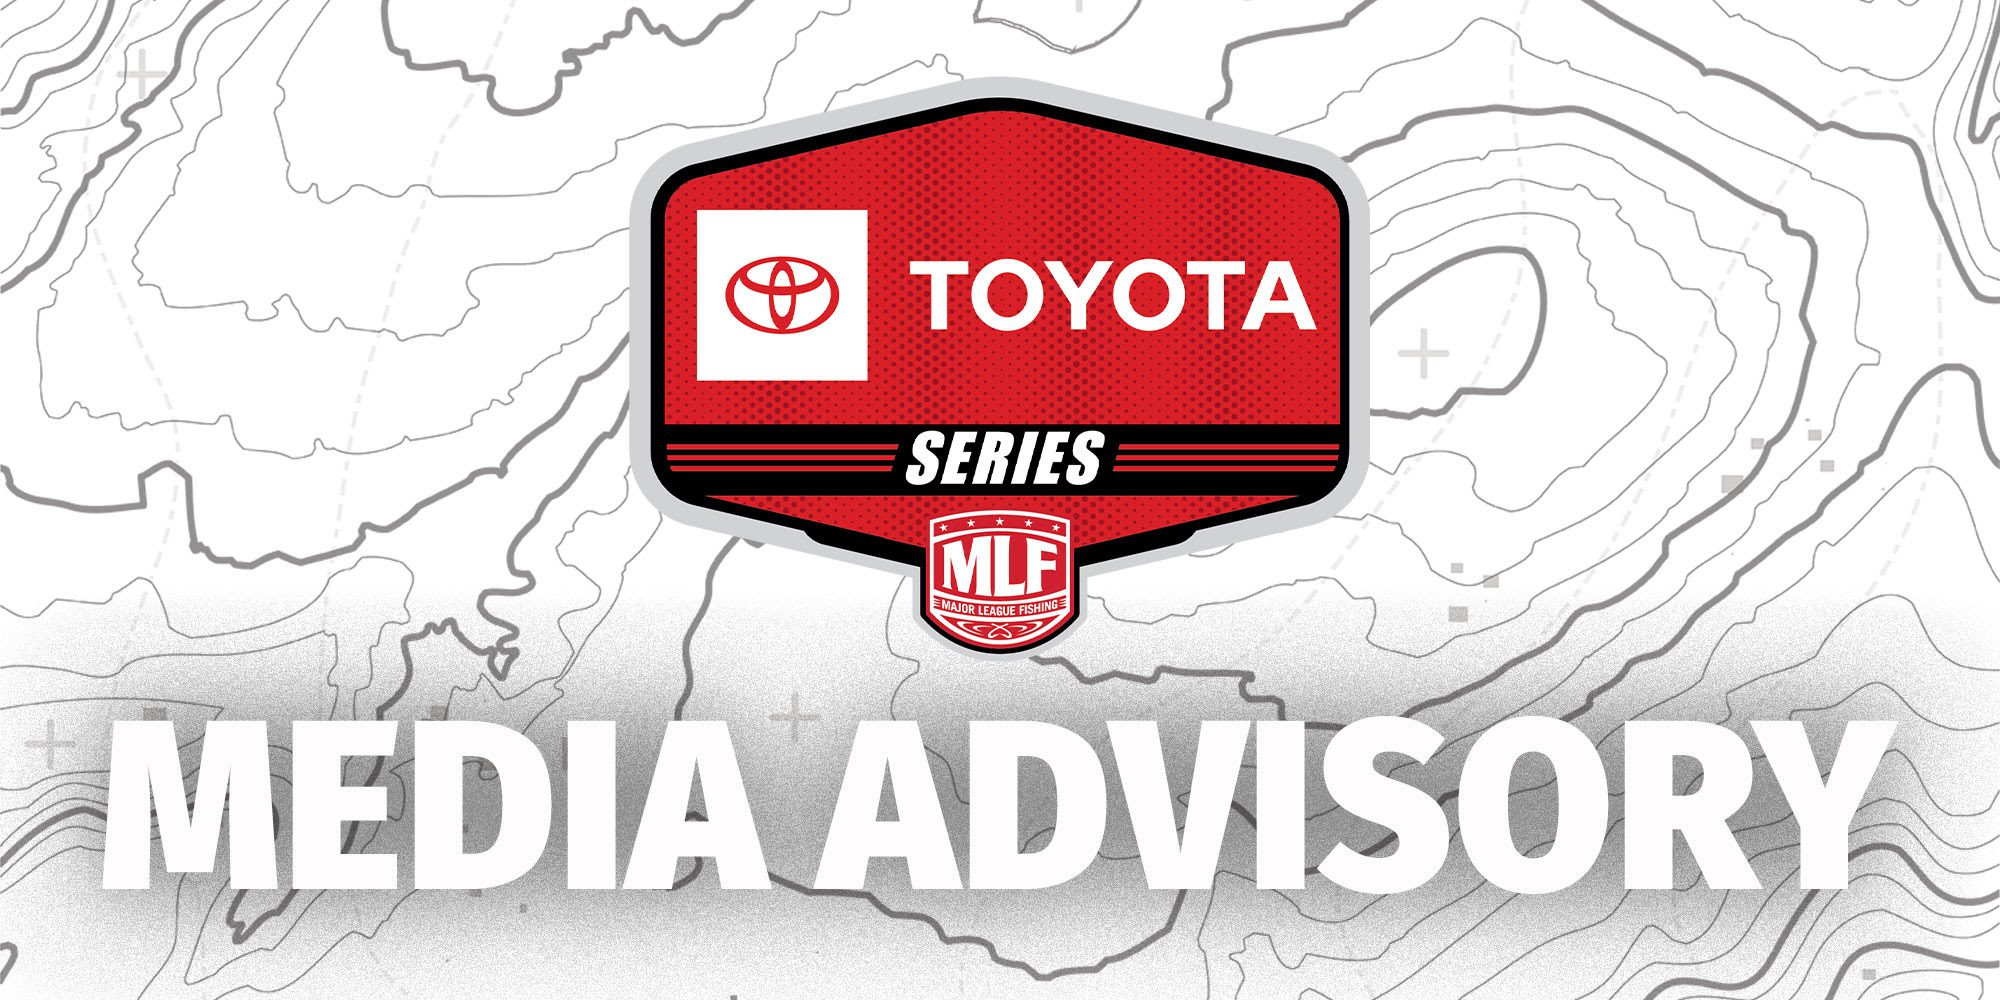 Inclement Weather Forces Two Toyota Series Event Cancellations Friday, Competition to Wrap Up in Both Events Saturday